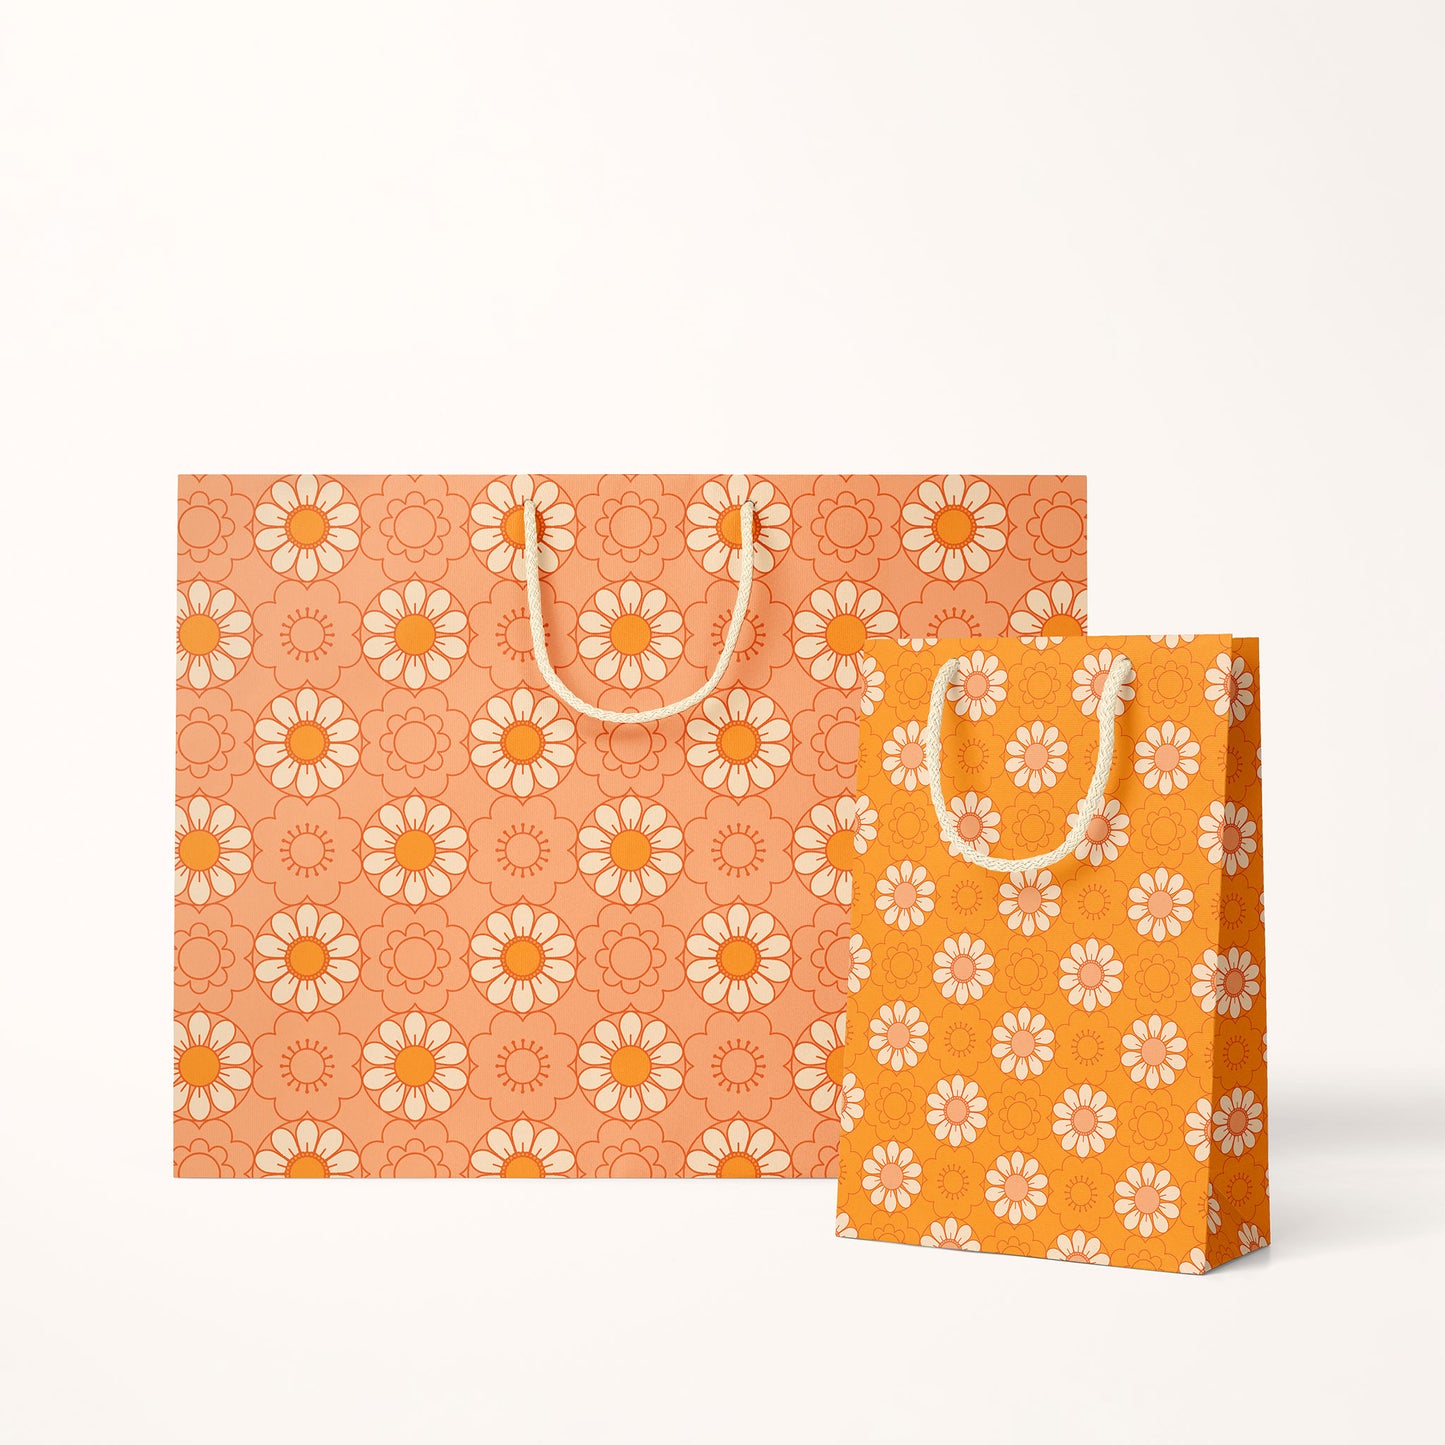 Two different sized paper gift bags with an orange background and a light yellow and orange repeating daisy print. They feature cotton string handles.